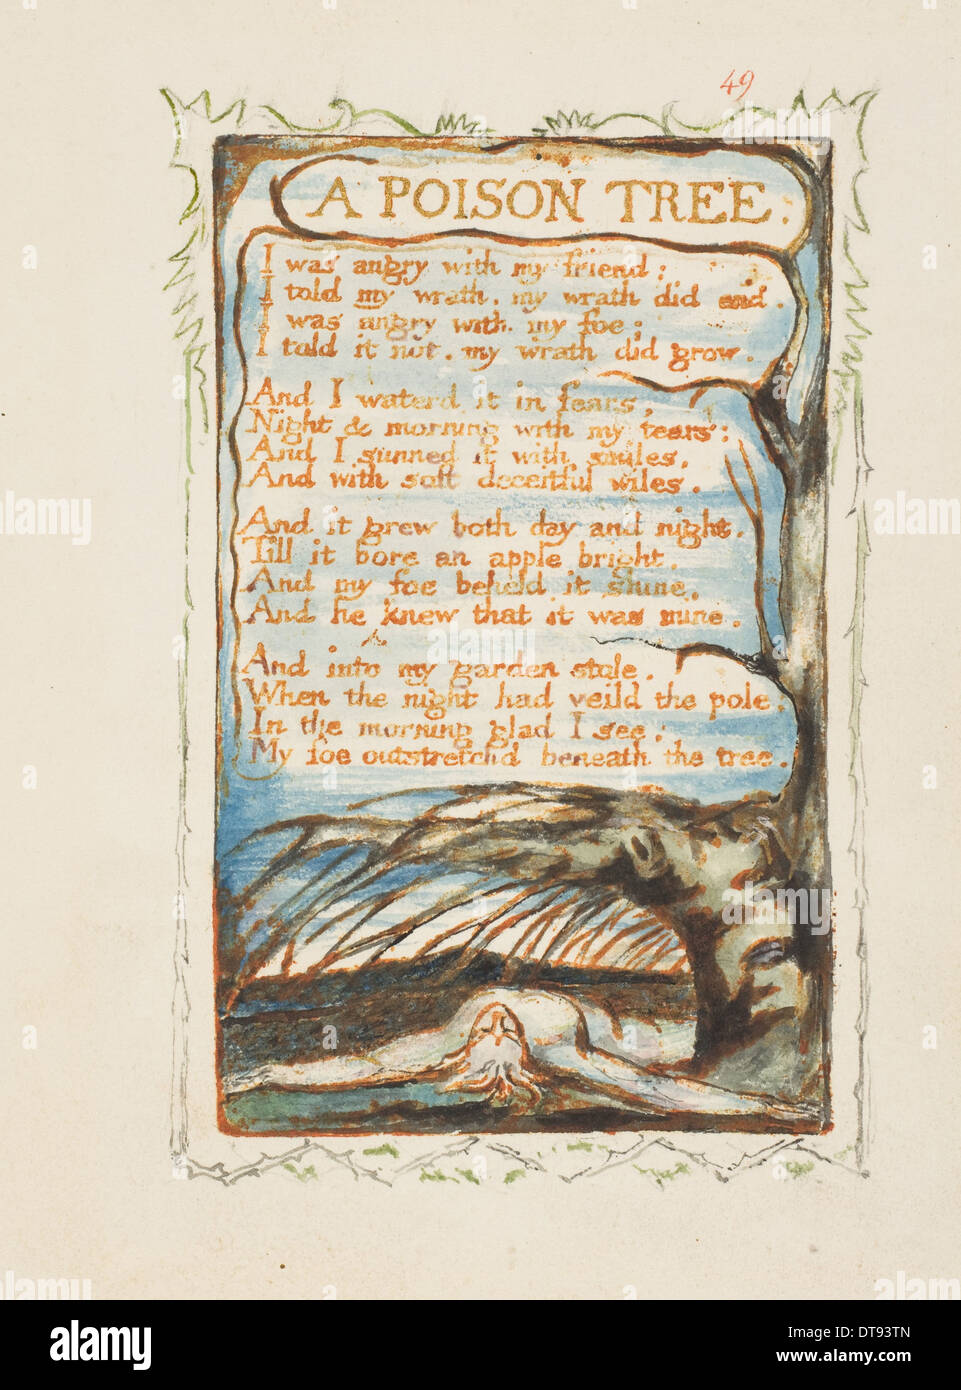 A Poison Tree. Songs of Innocence and of Experience, ca 1825. Artist: Blake, William (1757-1827) Stock Photo